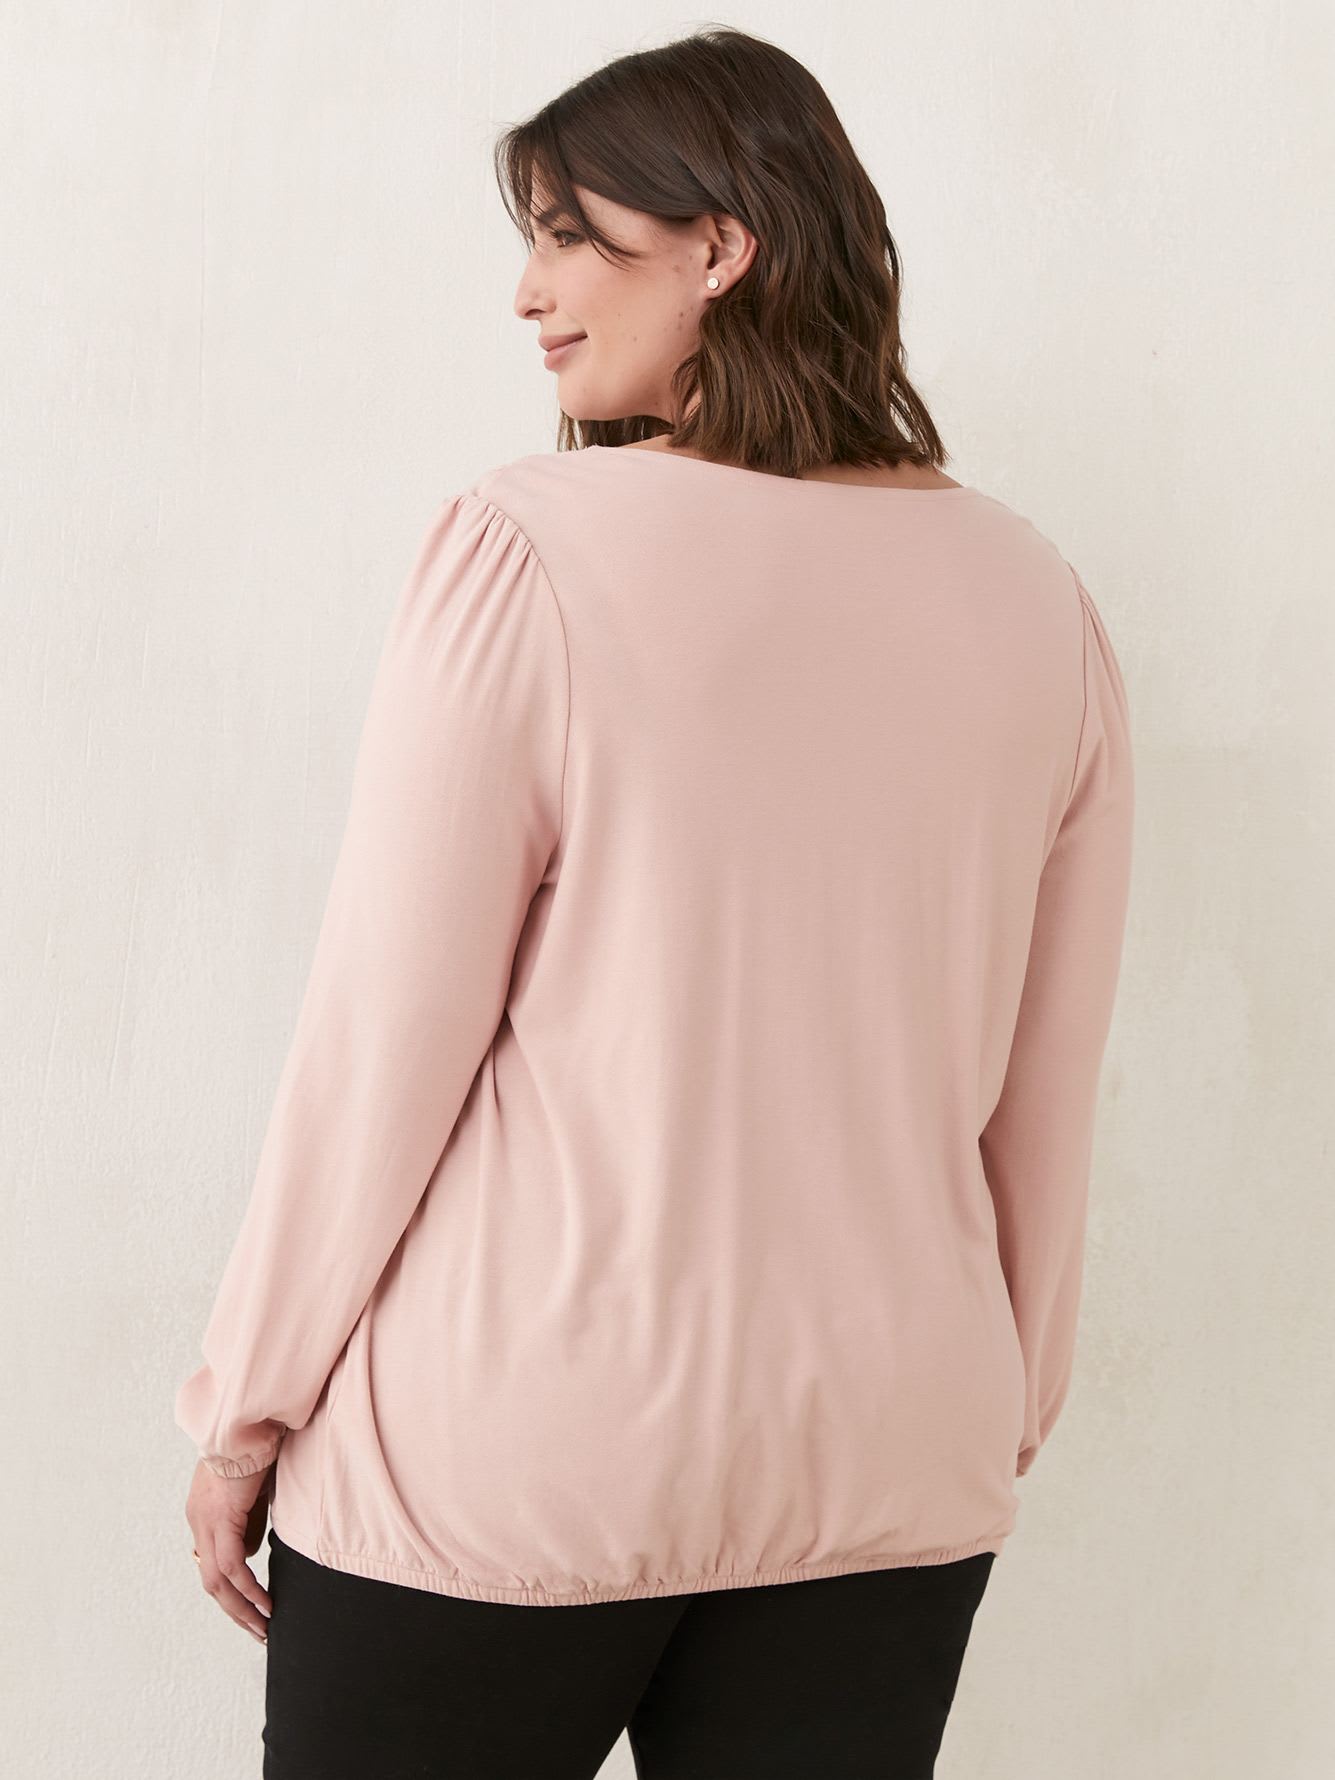 Crepe Knit Top With Lace - In Every Story